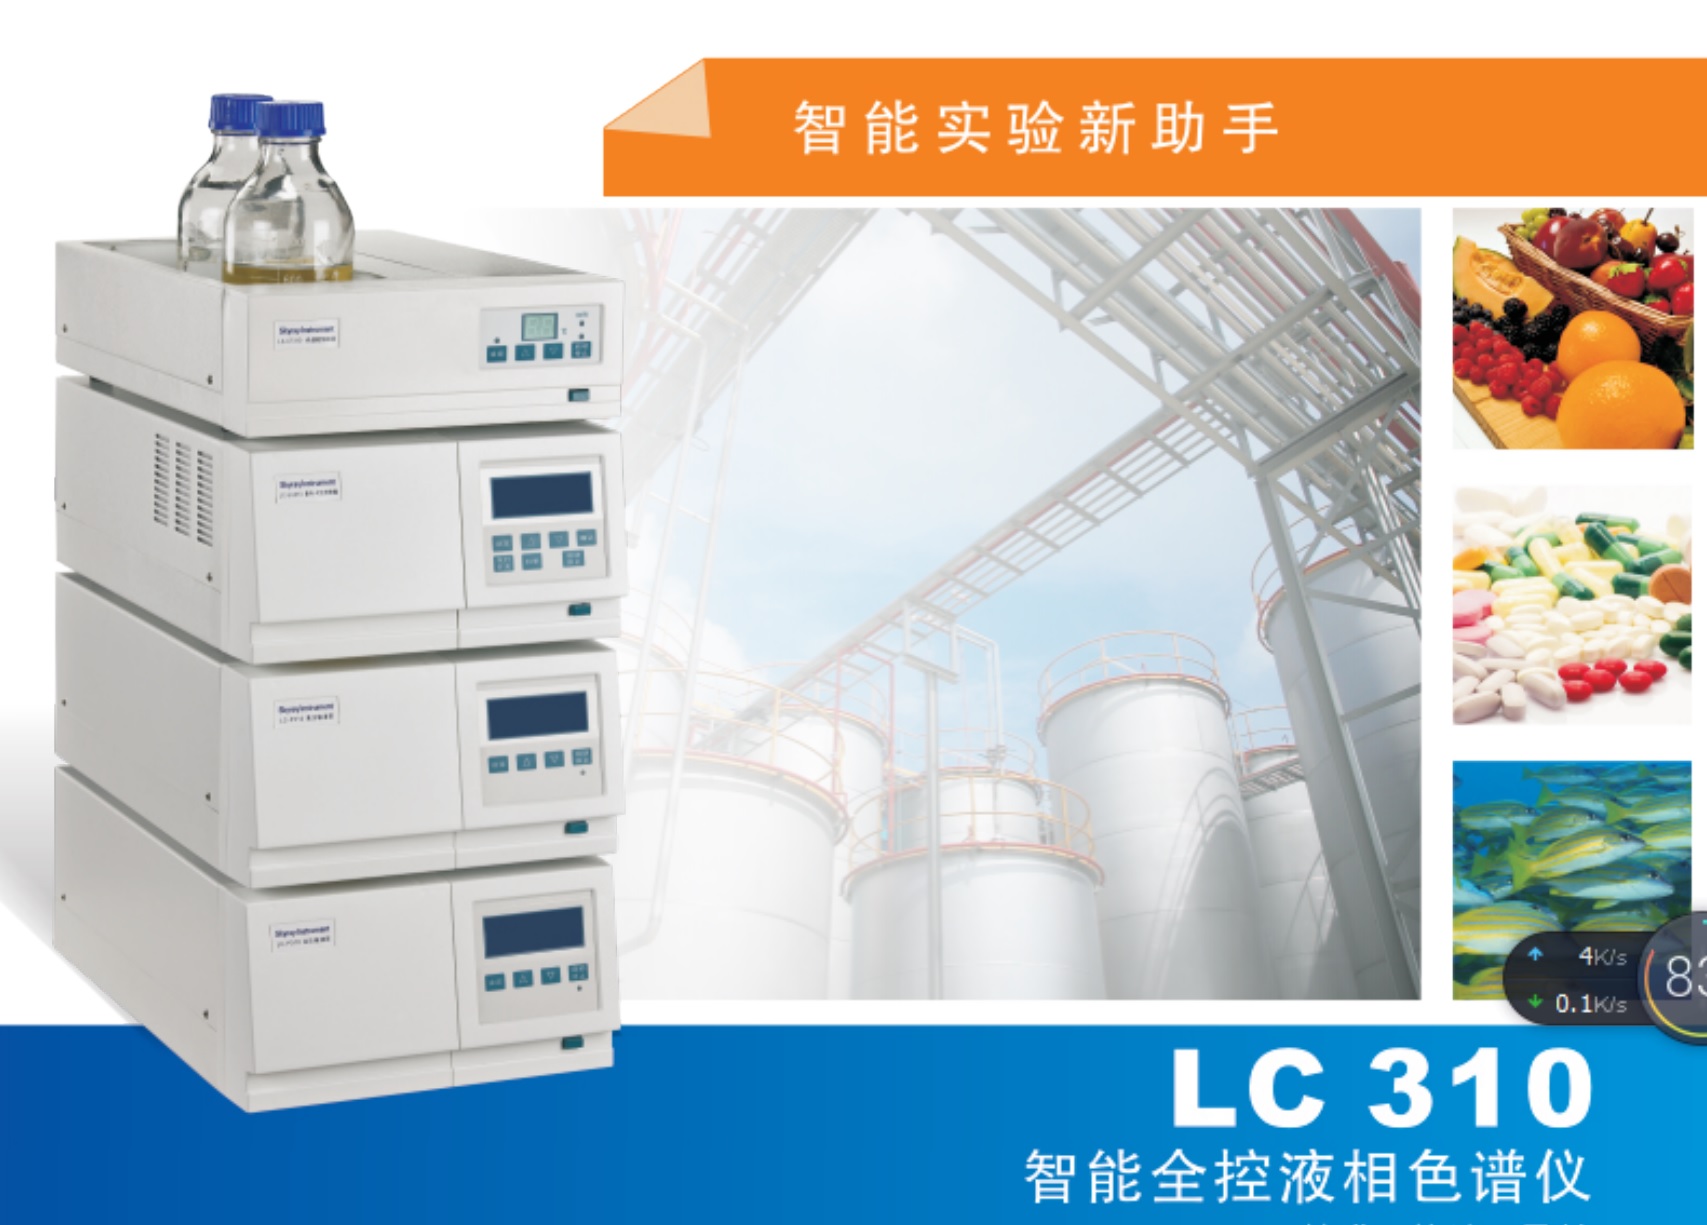 LC-310 liquid chromatography for ROHS2.0 o-phthalate two in electrical and electronic products-Jiangsu Skyray Instrument Co., Ltd.